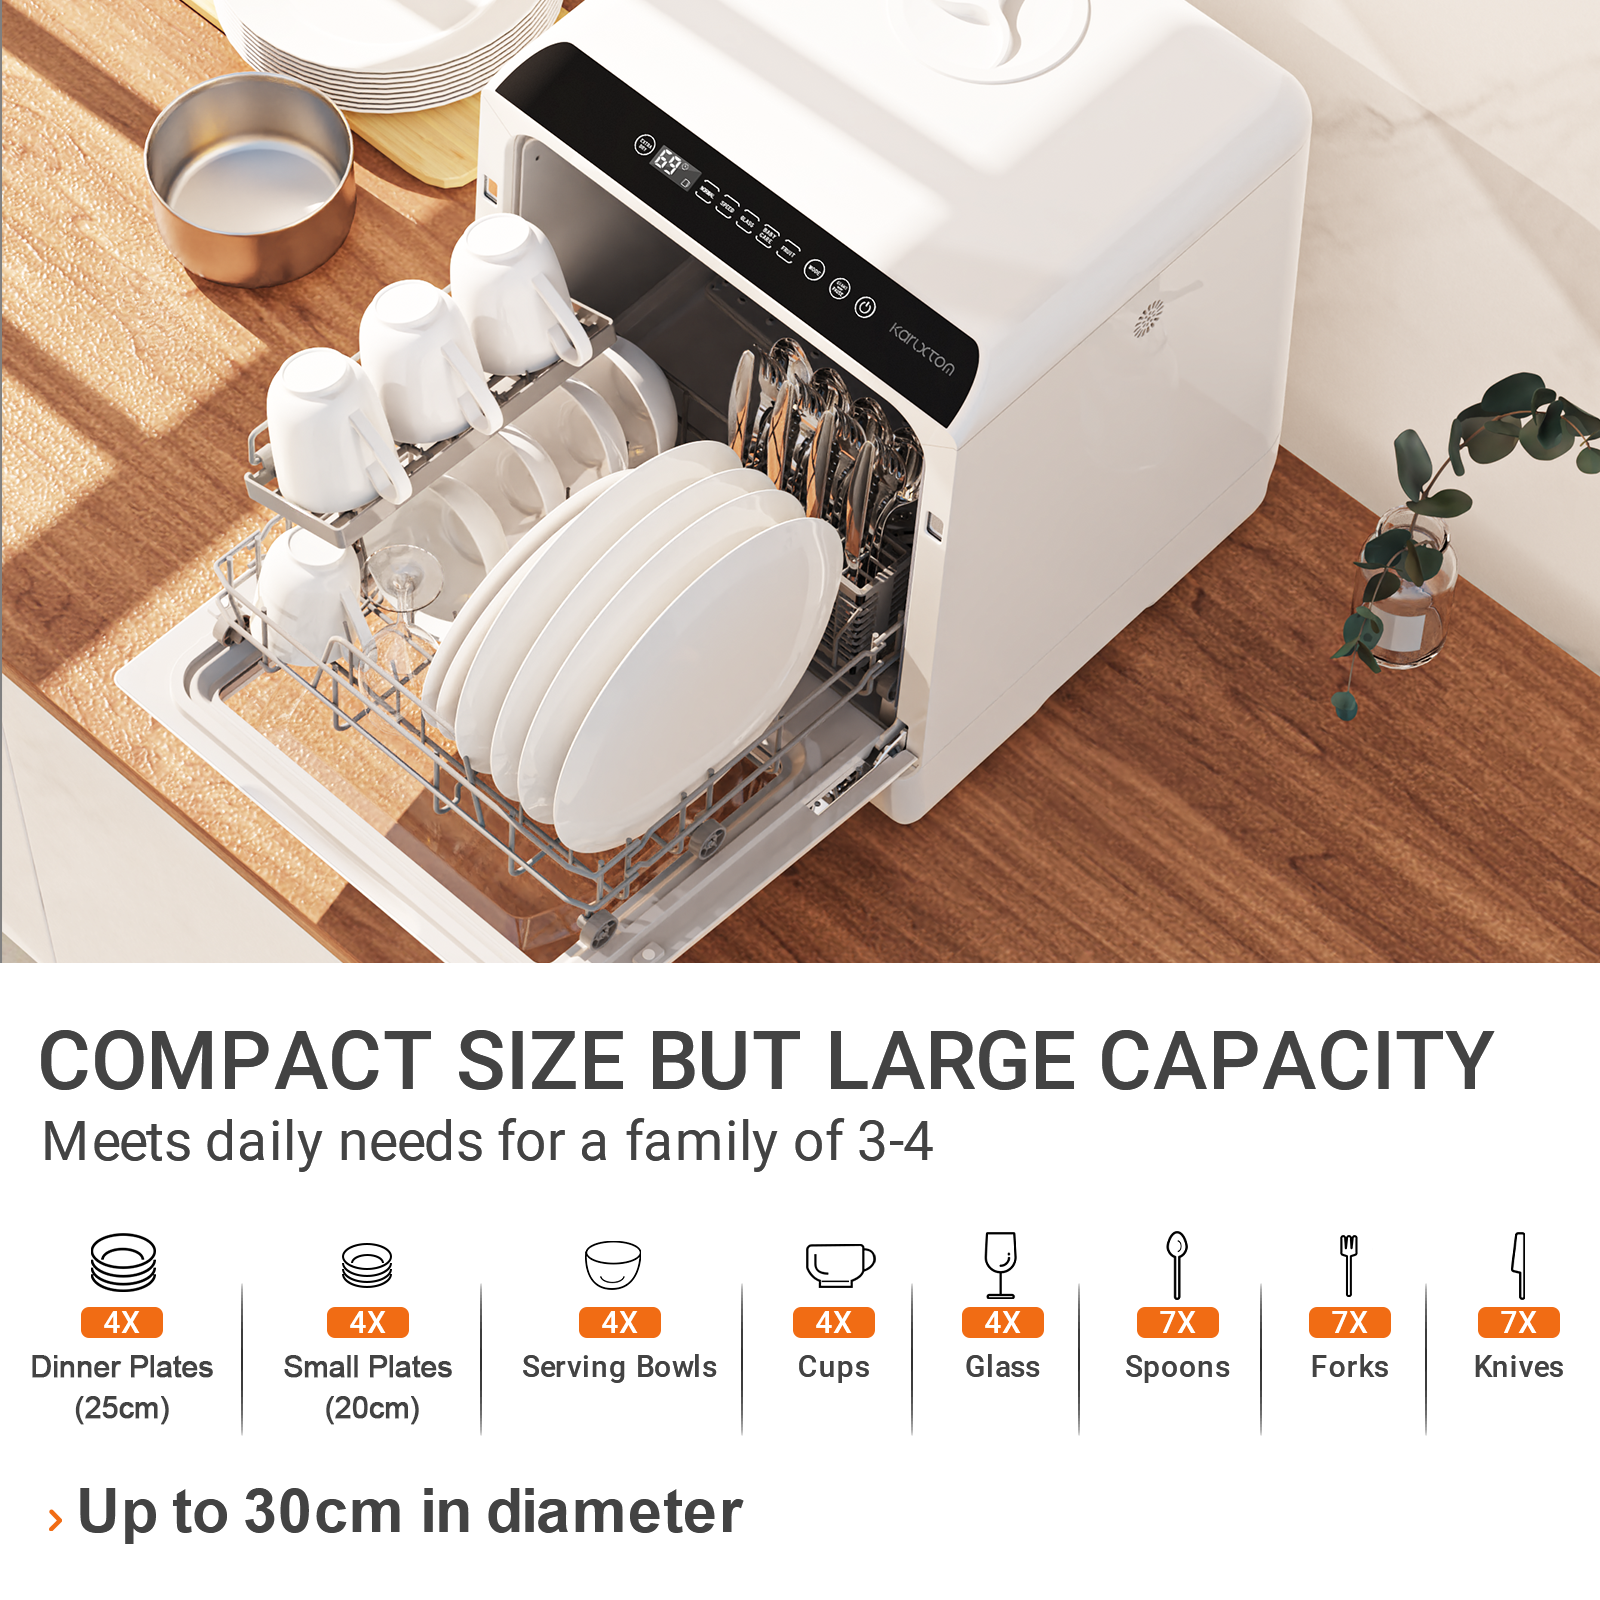 This portable, compact dishwasher is perfect for tiny spaces. –